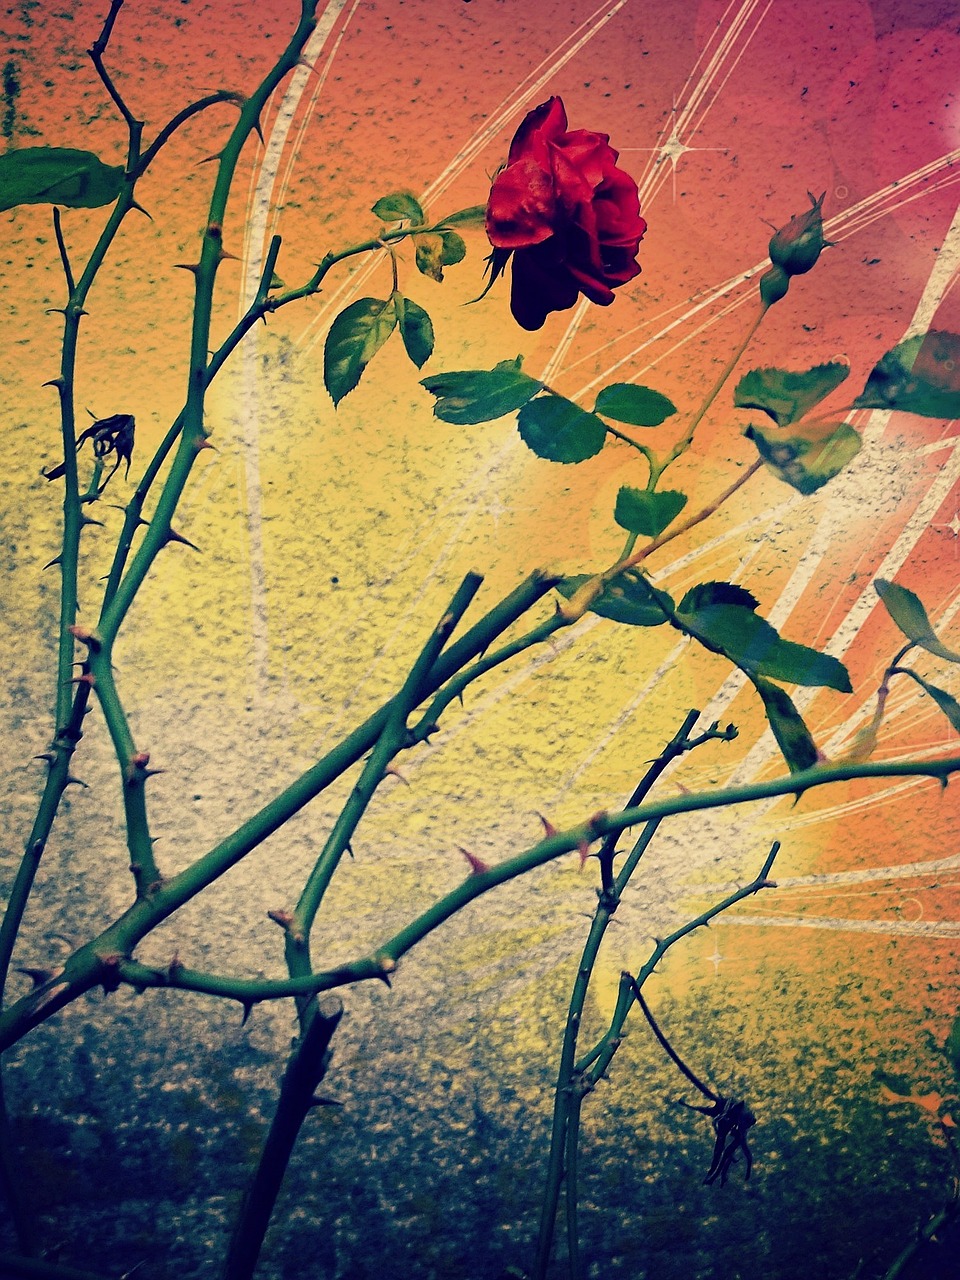 rose red thorns free photo